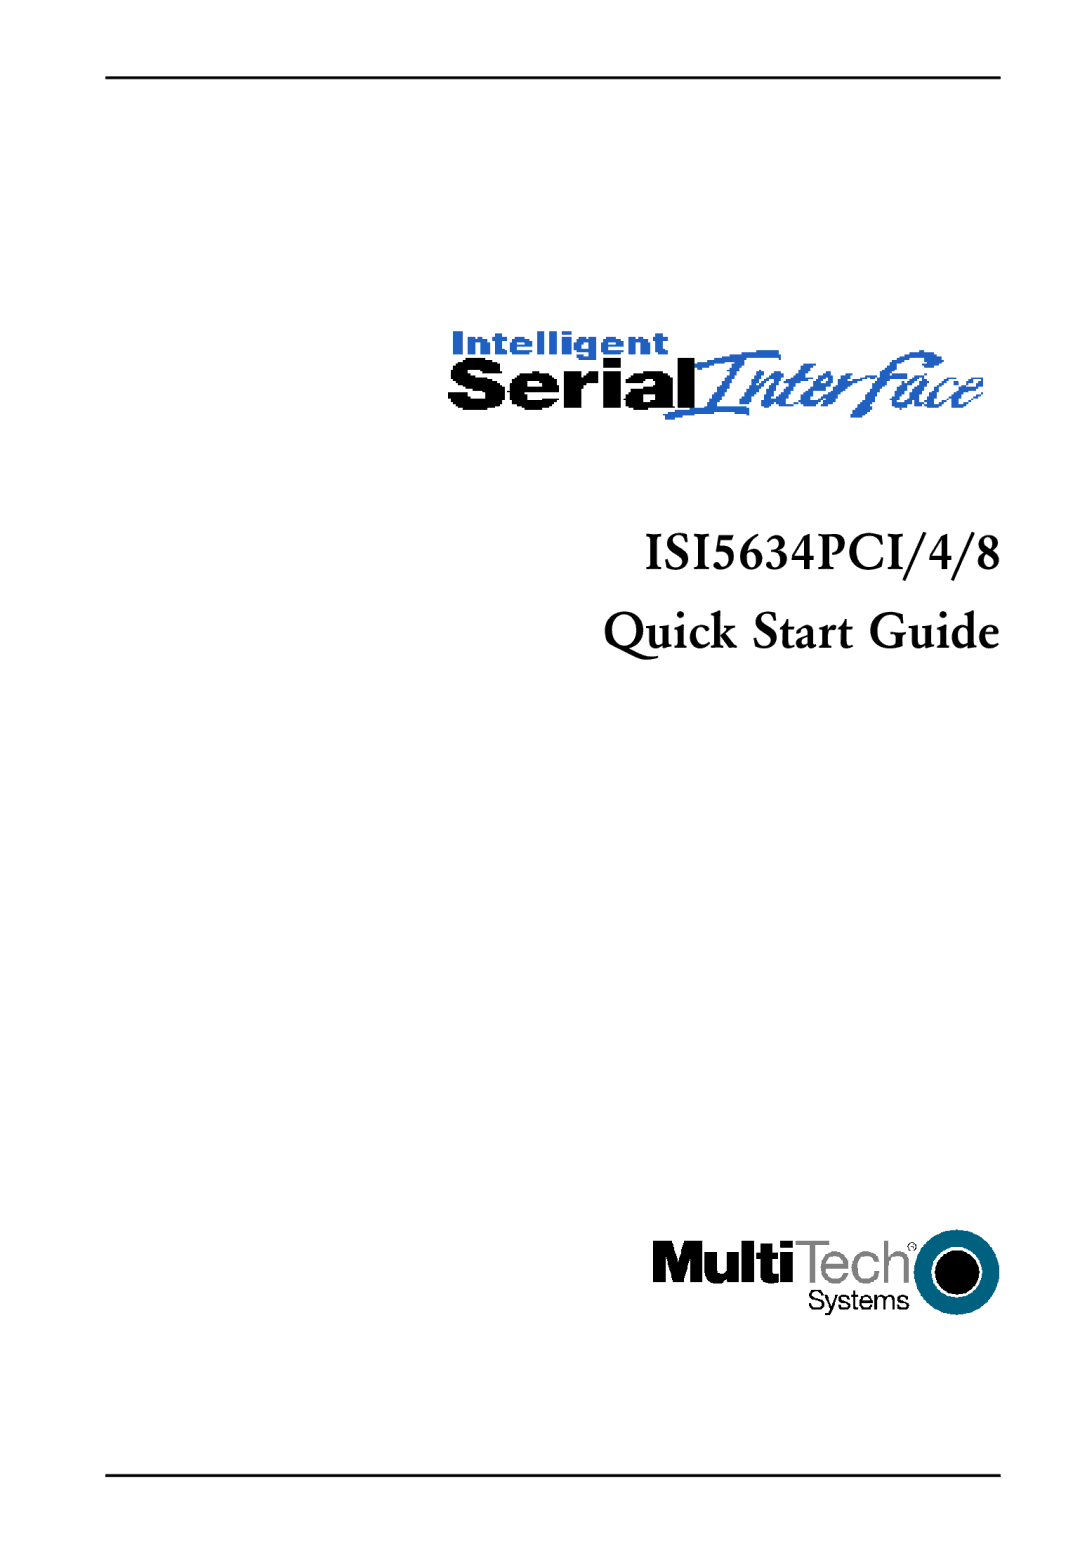 Multi-Tech Systems quick start ISI5634PCI/4/8 Quick Start Guide 